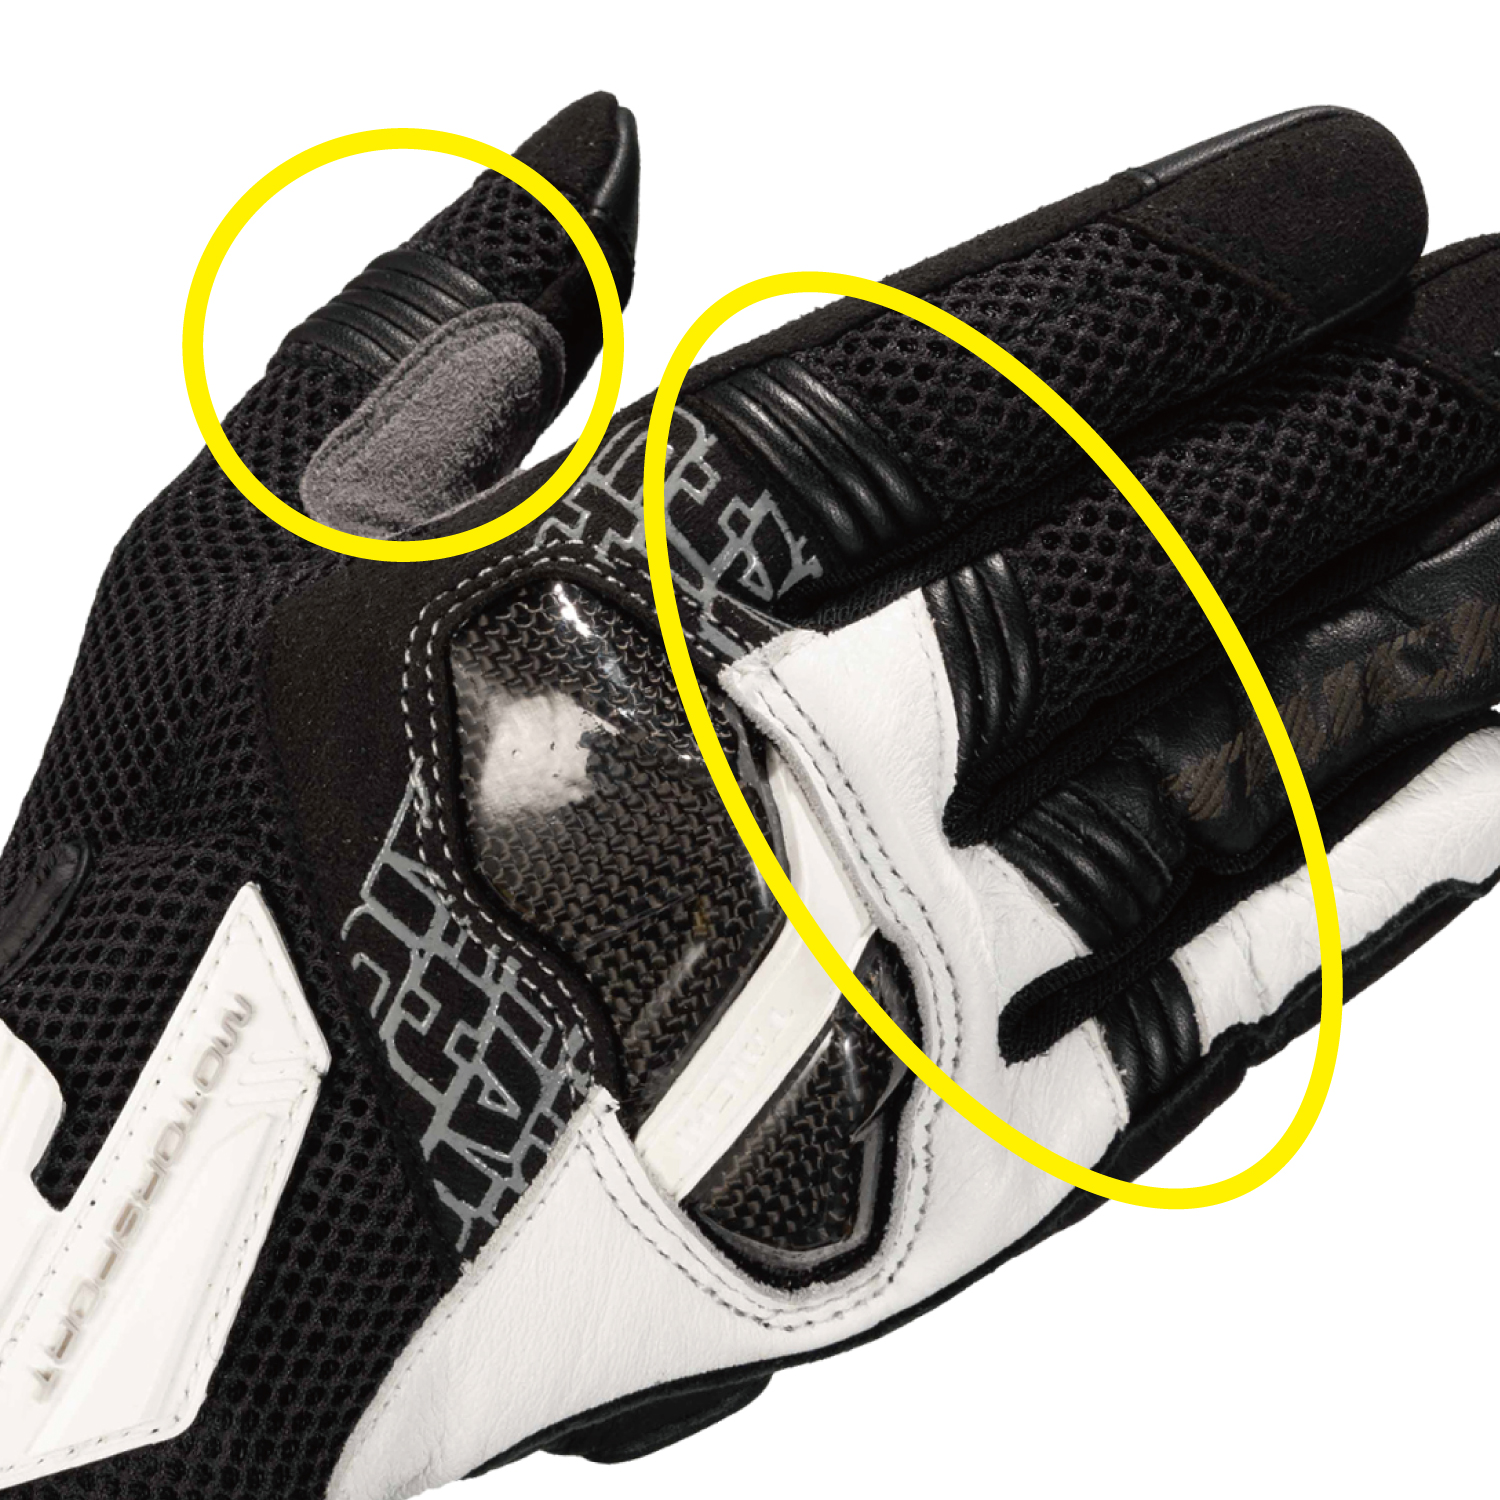 Shirring is applied to a part of the finger to increase elasticity and realize smooth clutch operation and comfort when riding.